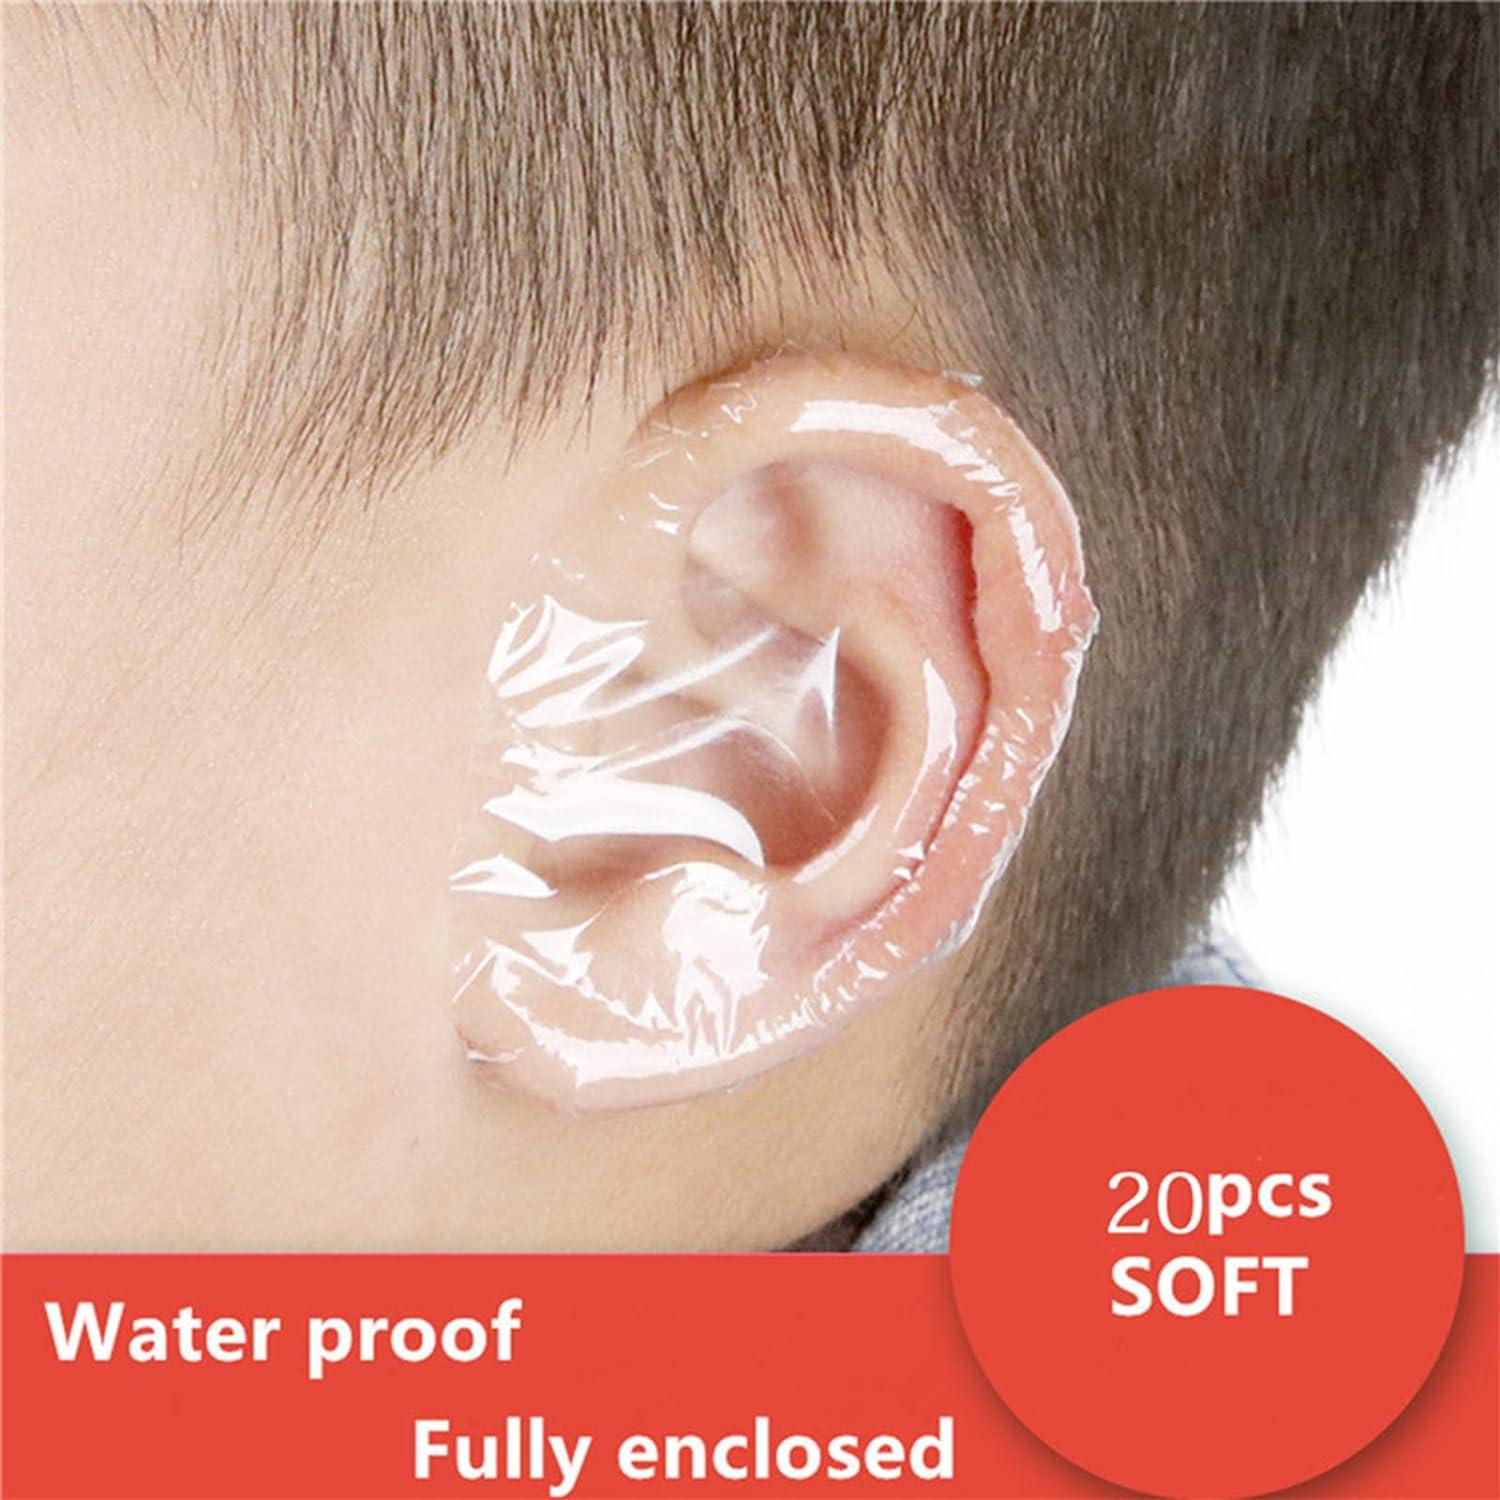 Baby Waterproof Ear Stickers, Baby Waterproof Ear Protector, Newborn Ear  Protection for Swimming Showering Surfing Snorkeling and Other Water Sports